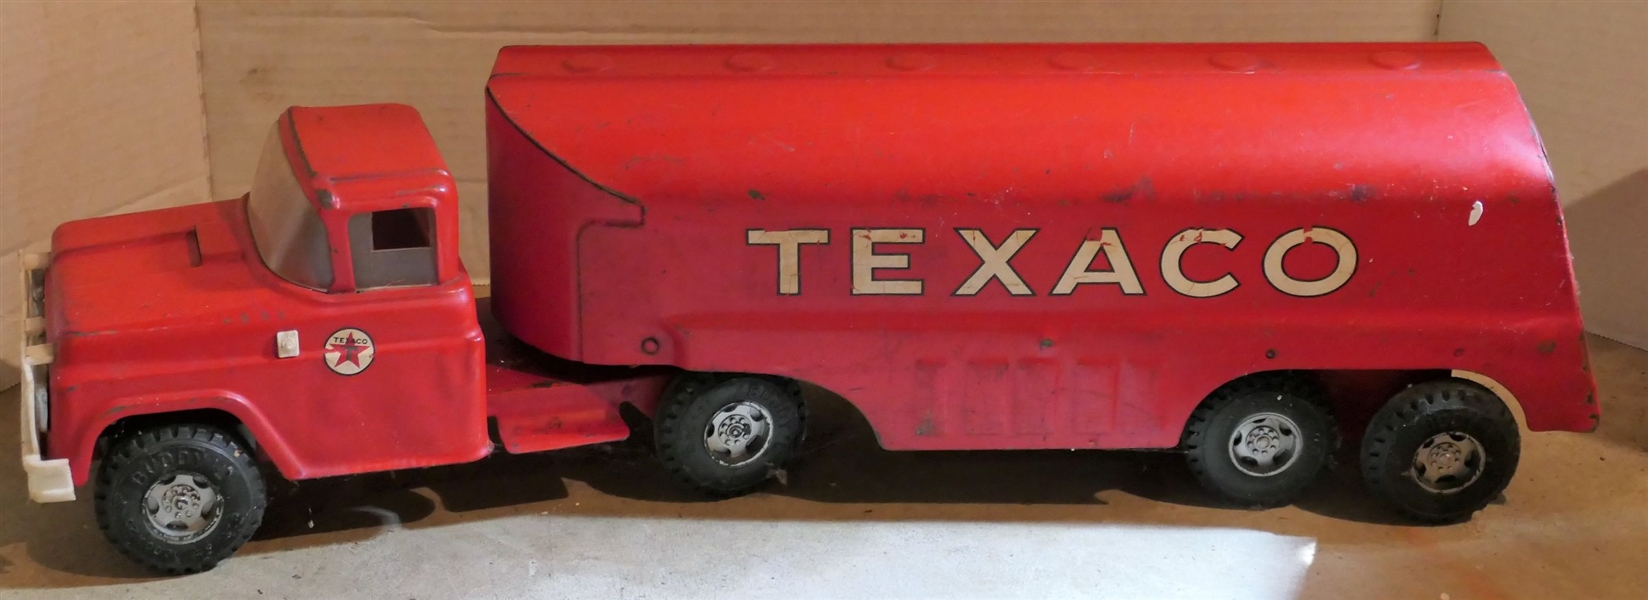 Buddy L Texaco Truck - With Plastic Grill - Metal in Good Condition - Truck Measures 6" tall 22" Long